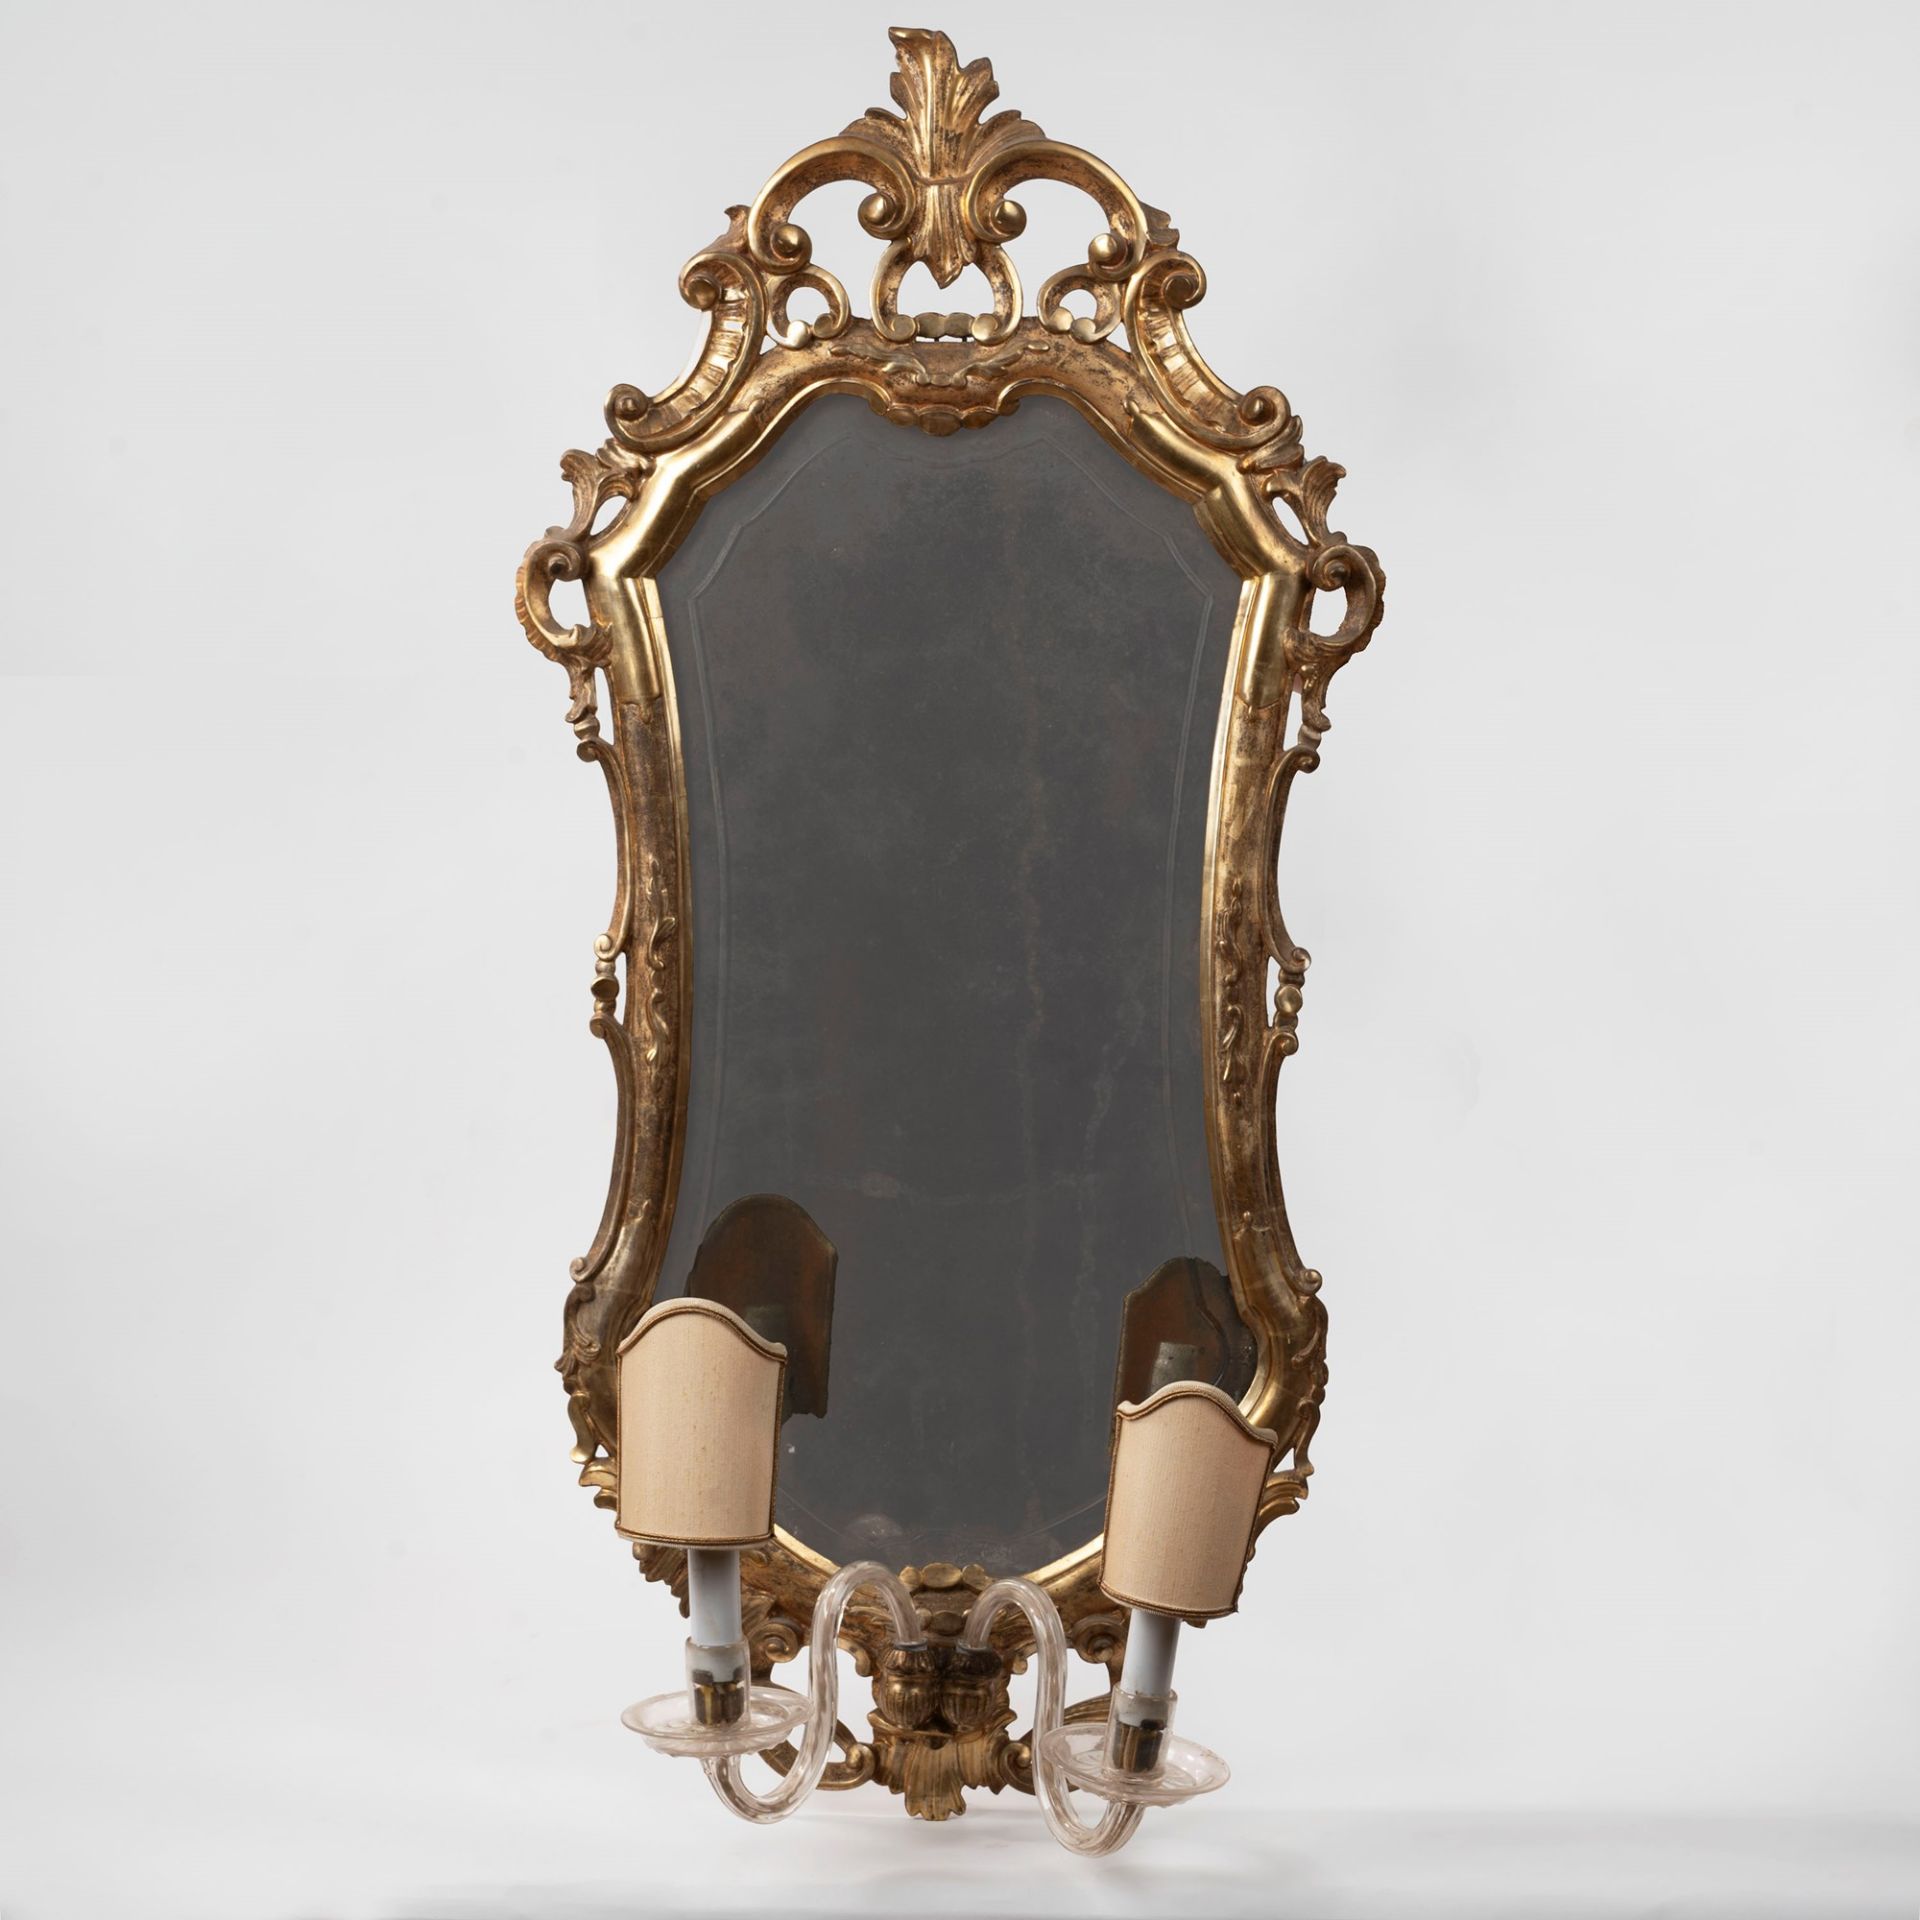 Pair of carved and gilded wooden mirrors, 20th century - Image 2 of 5